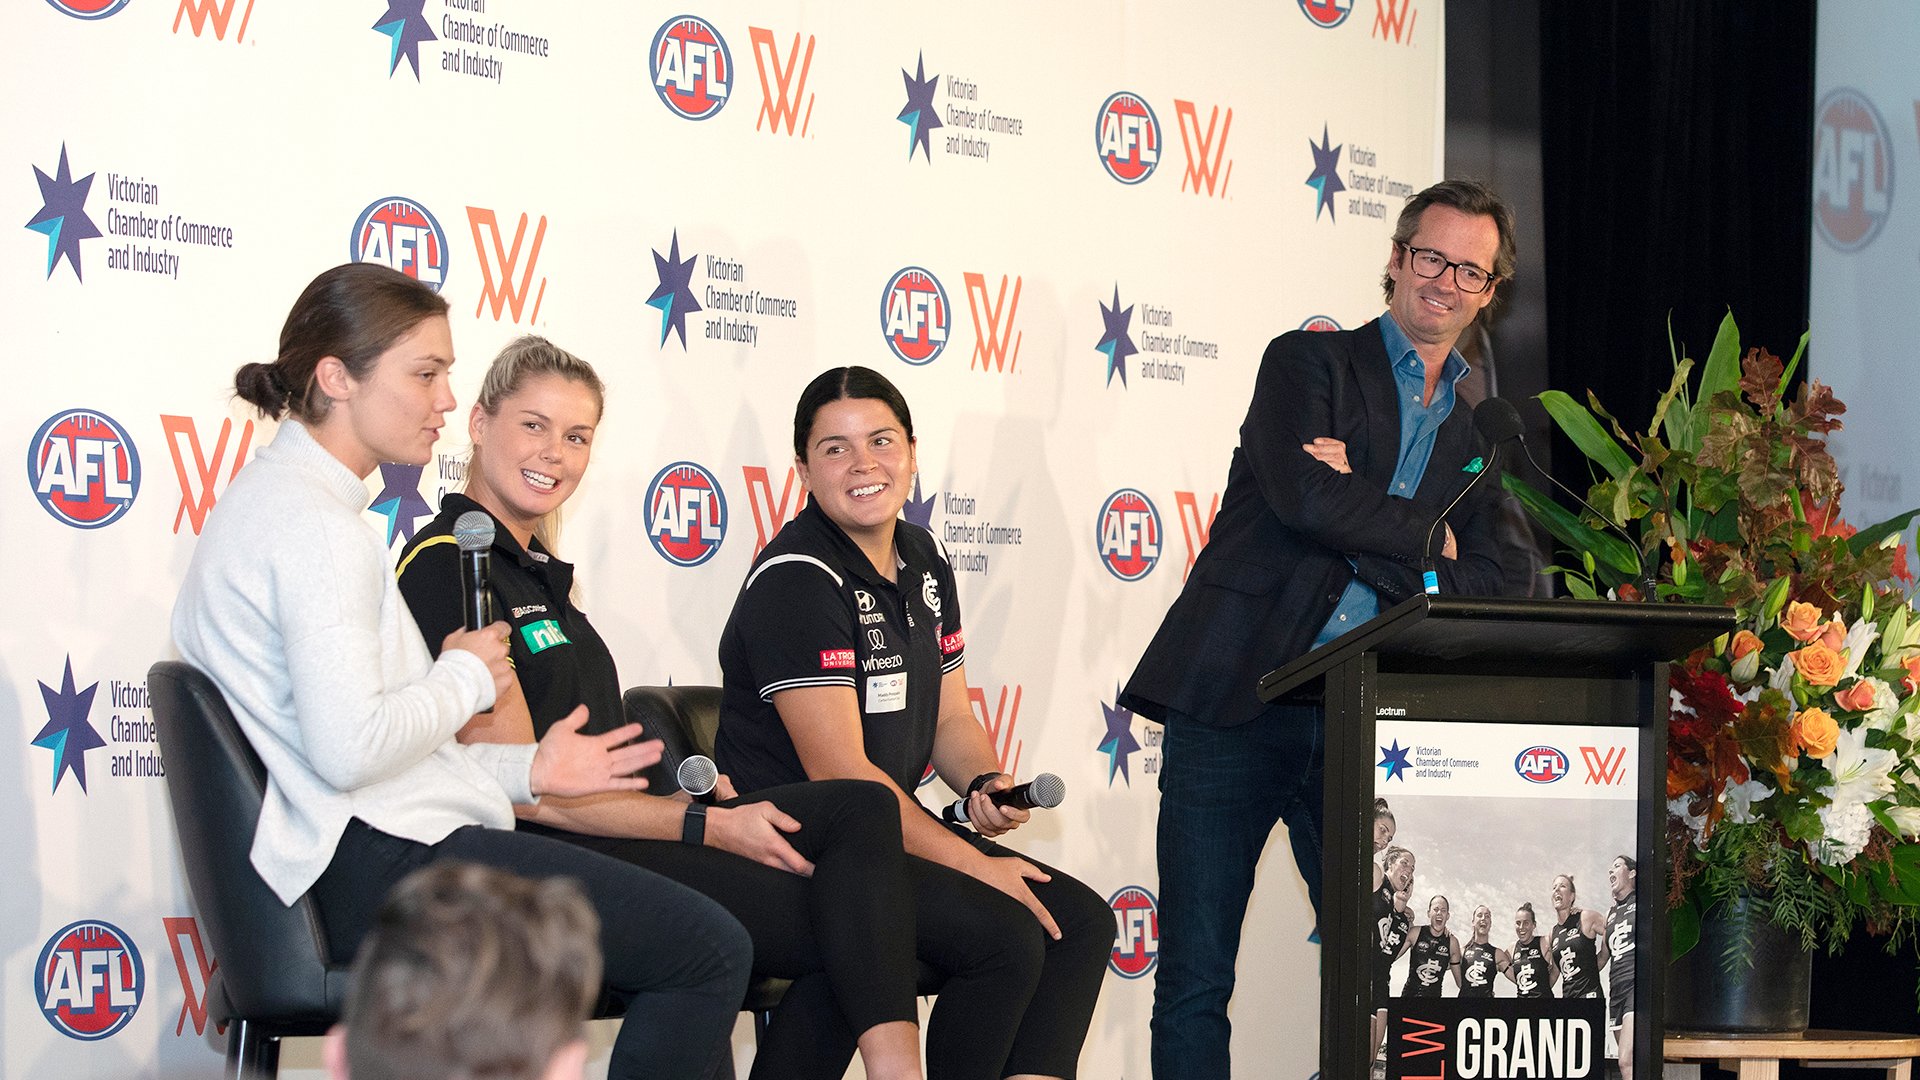 AFLW Grand Final Lunch